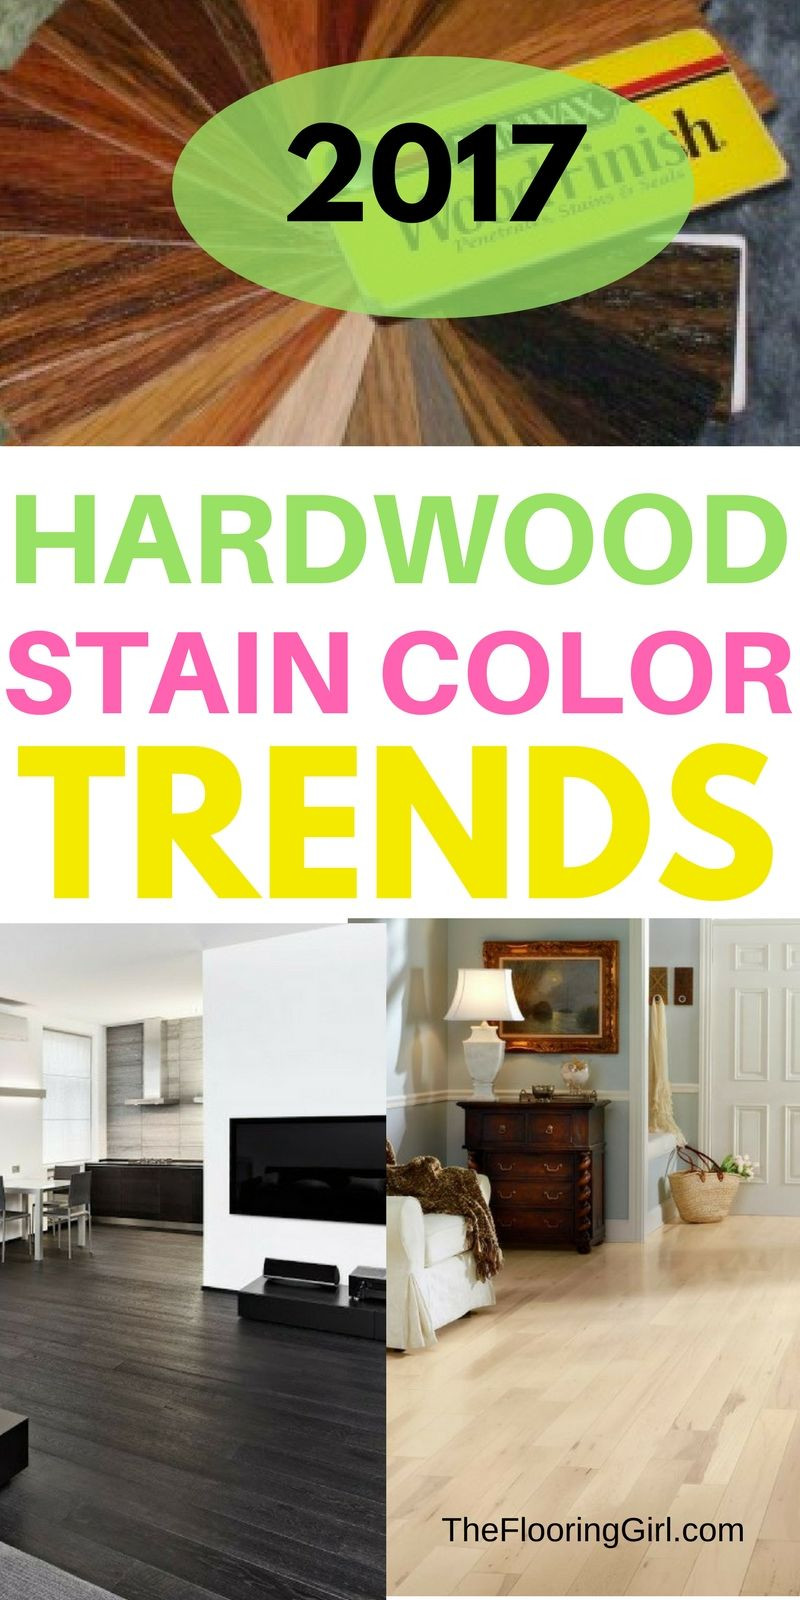 21 Awesome Hardwood Floor Restore Kit 2024 free download hardwood floor restore kit of hardwood flooring stain color trends 2018 more from the flooring with hardwood flooring stain color trends for 2017 hardwood colors that are in style thefloorin